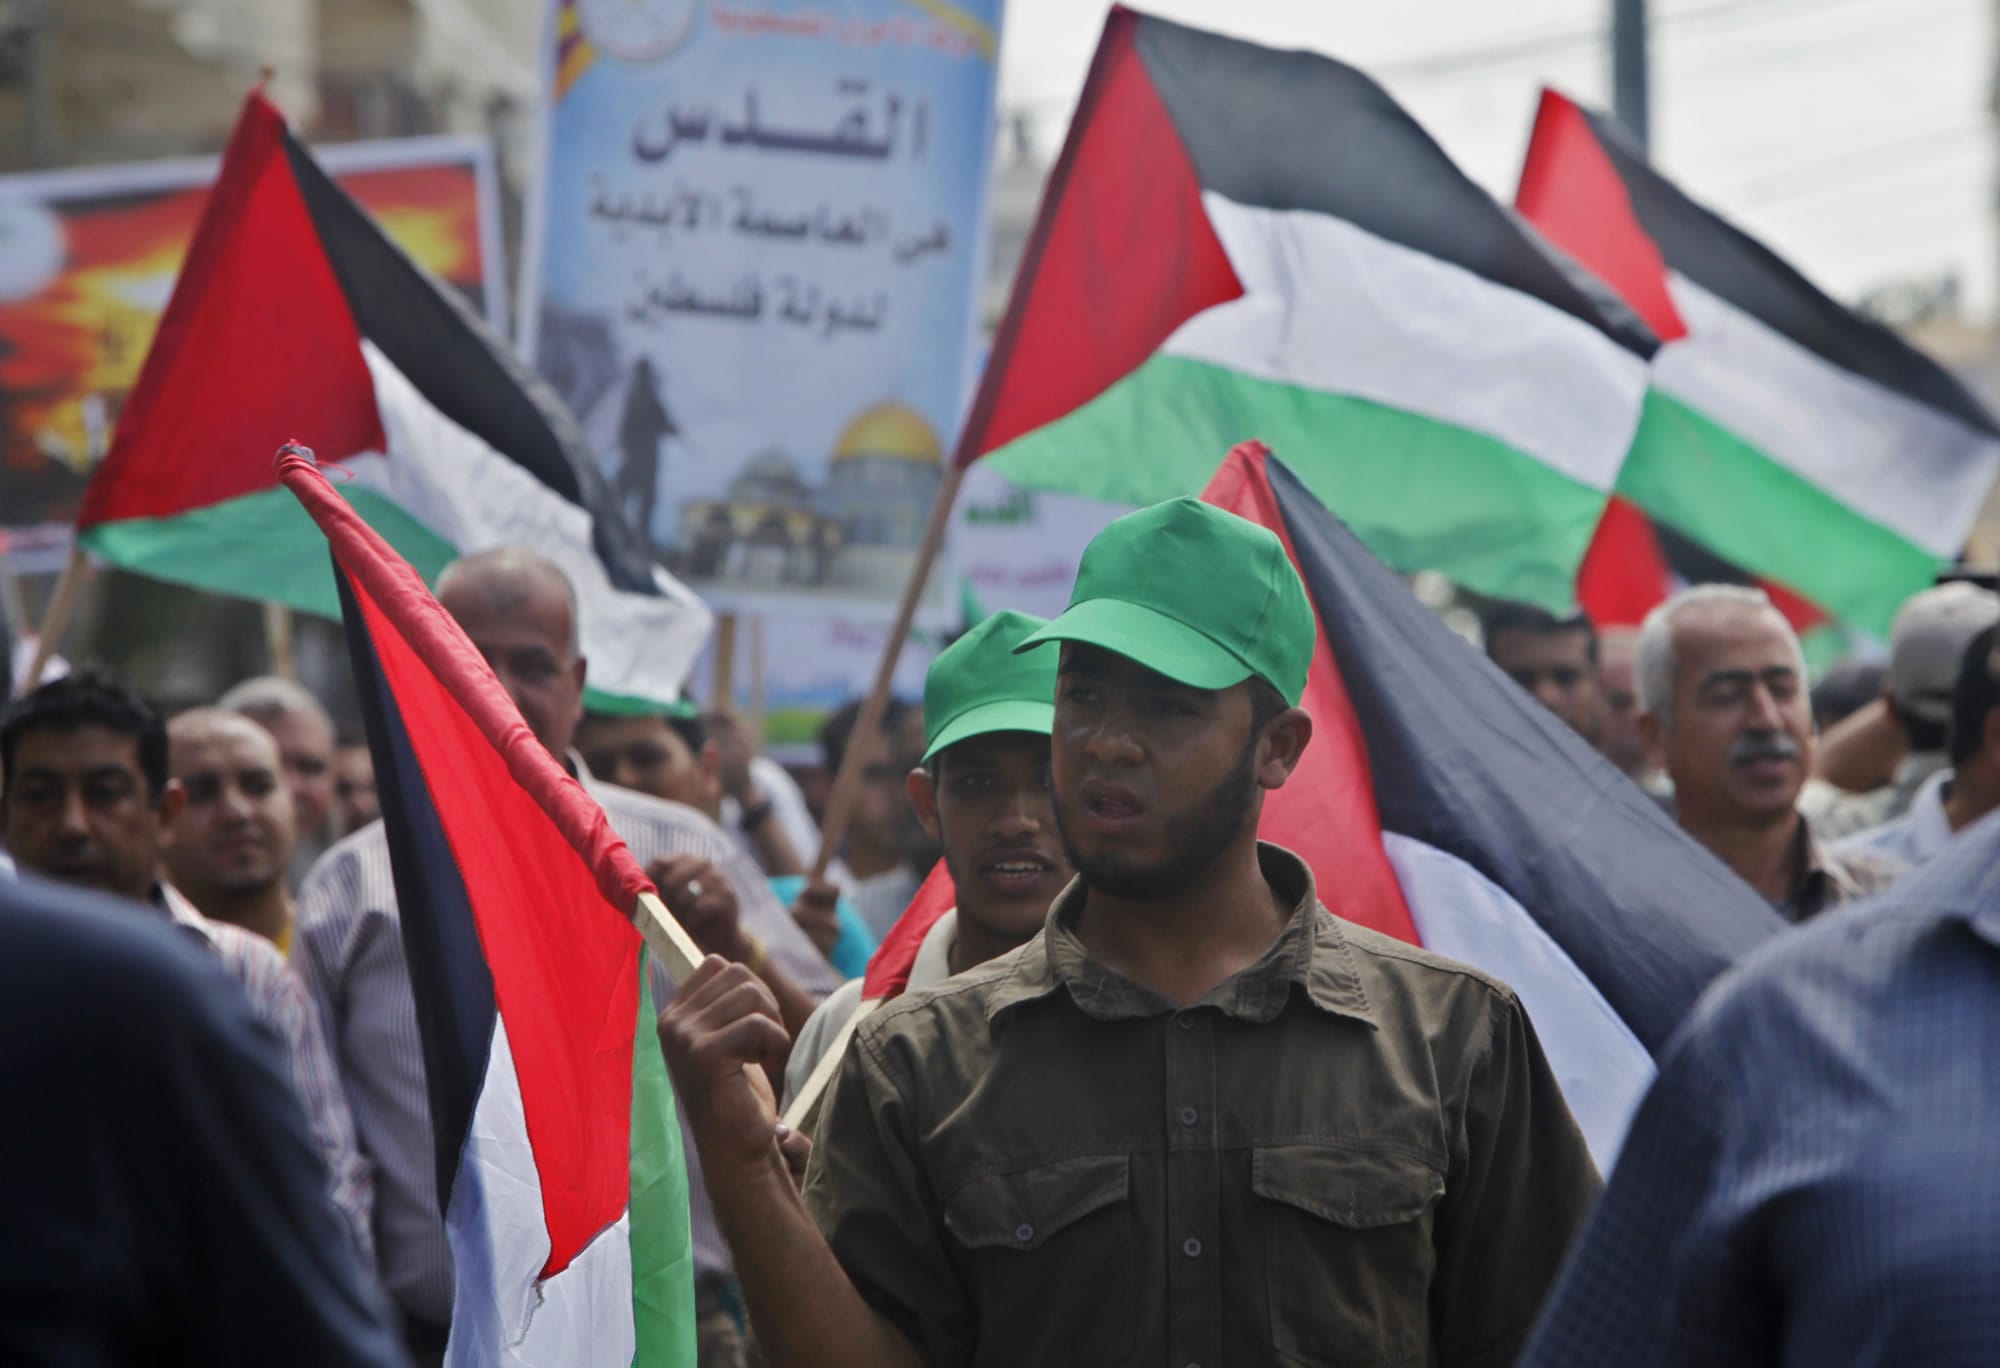 Palestinians wave their national flags during a protest to condemn what protesters claim was a desecration of Al-Aqsa Mosque in Jerusalem by Jewish extremists in Gaza City on Wednesday.